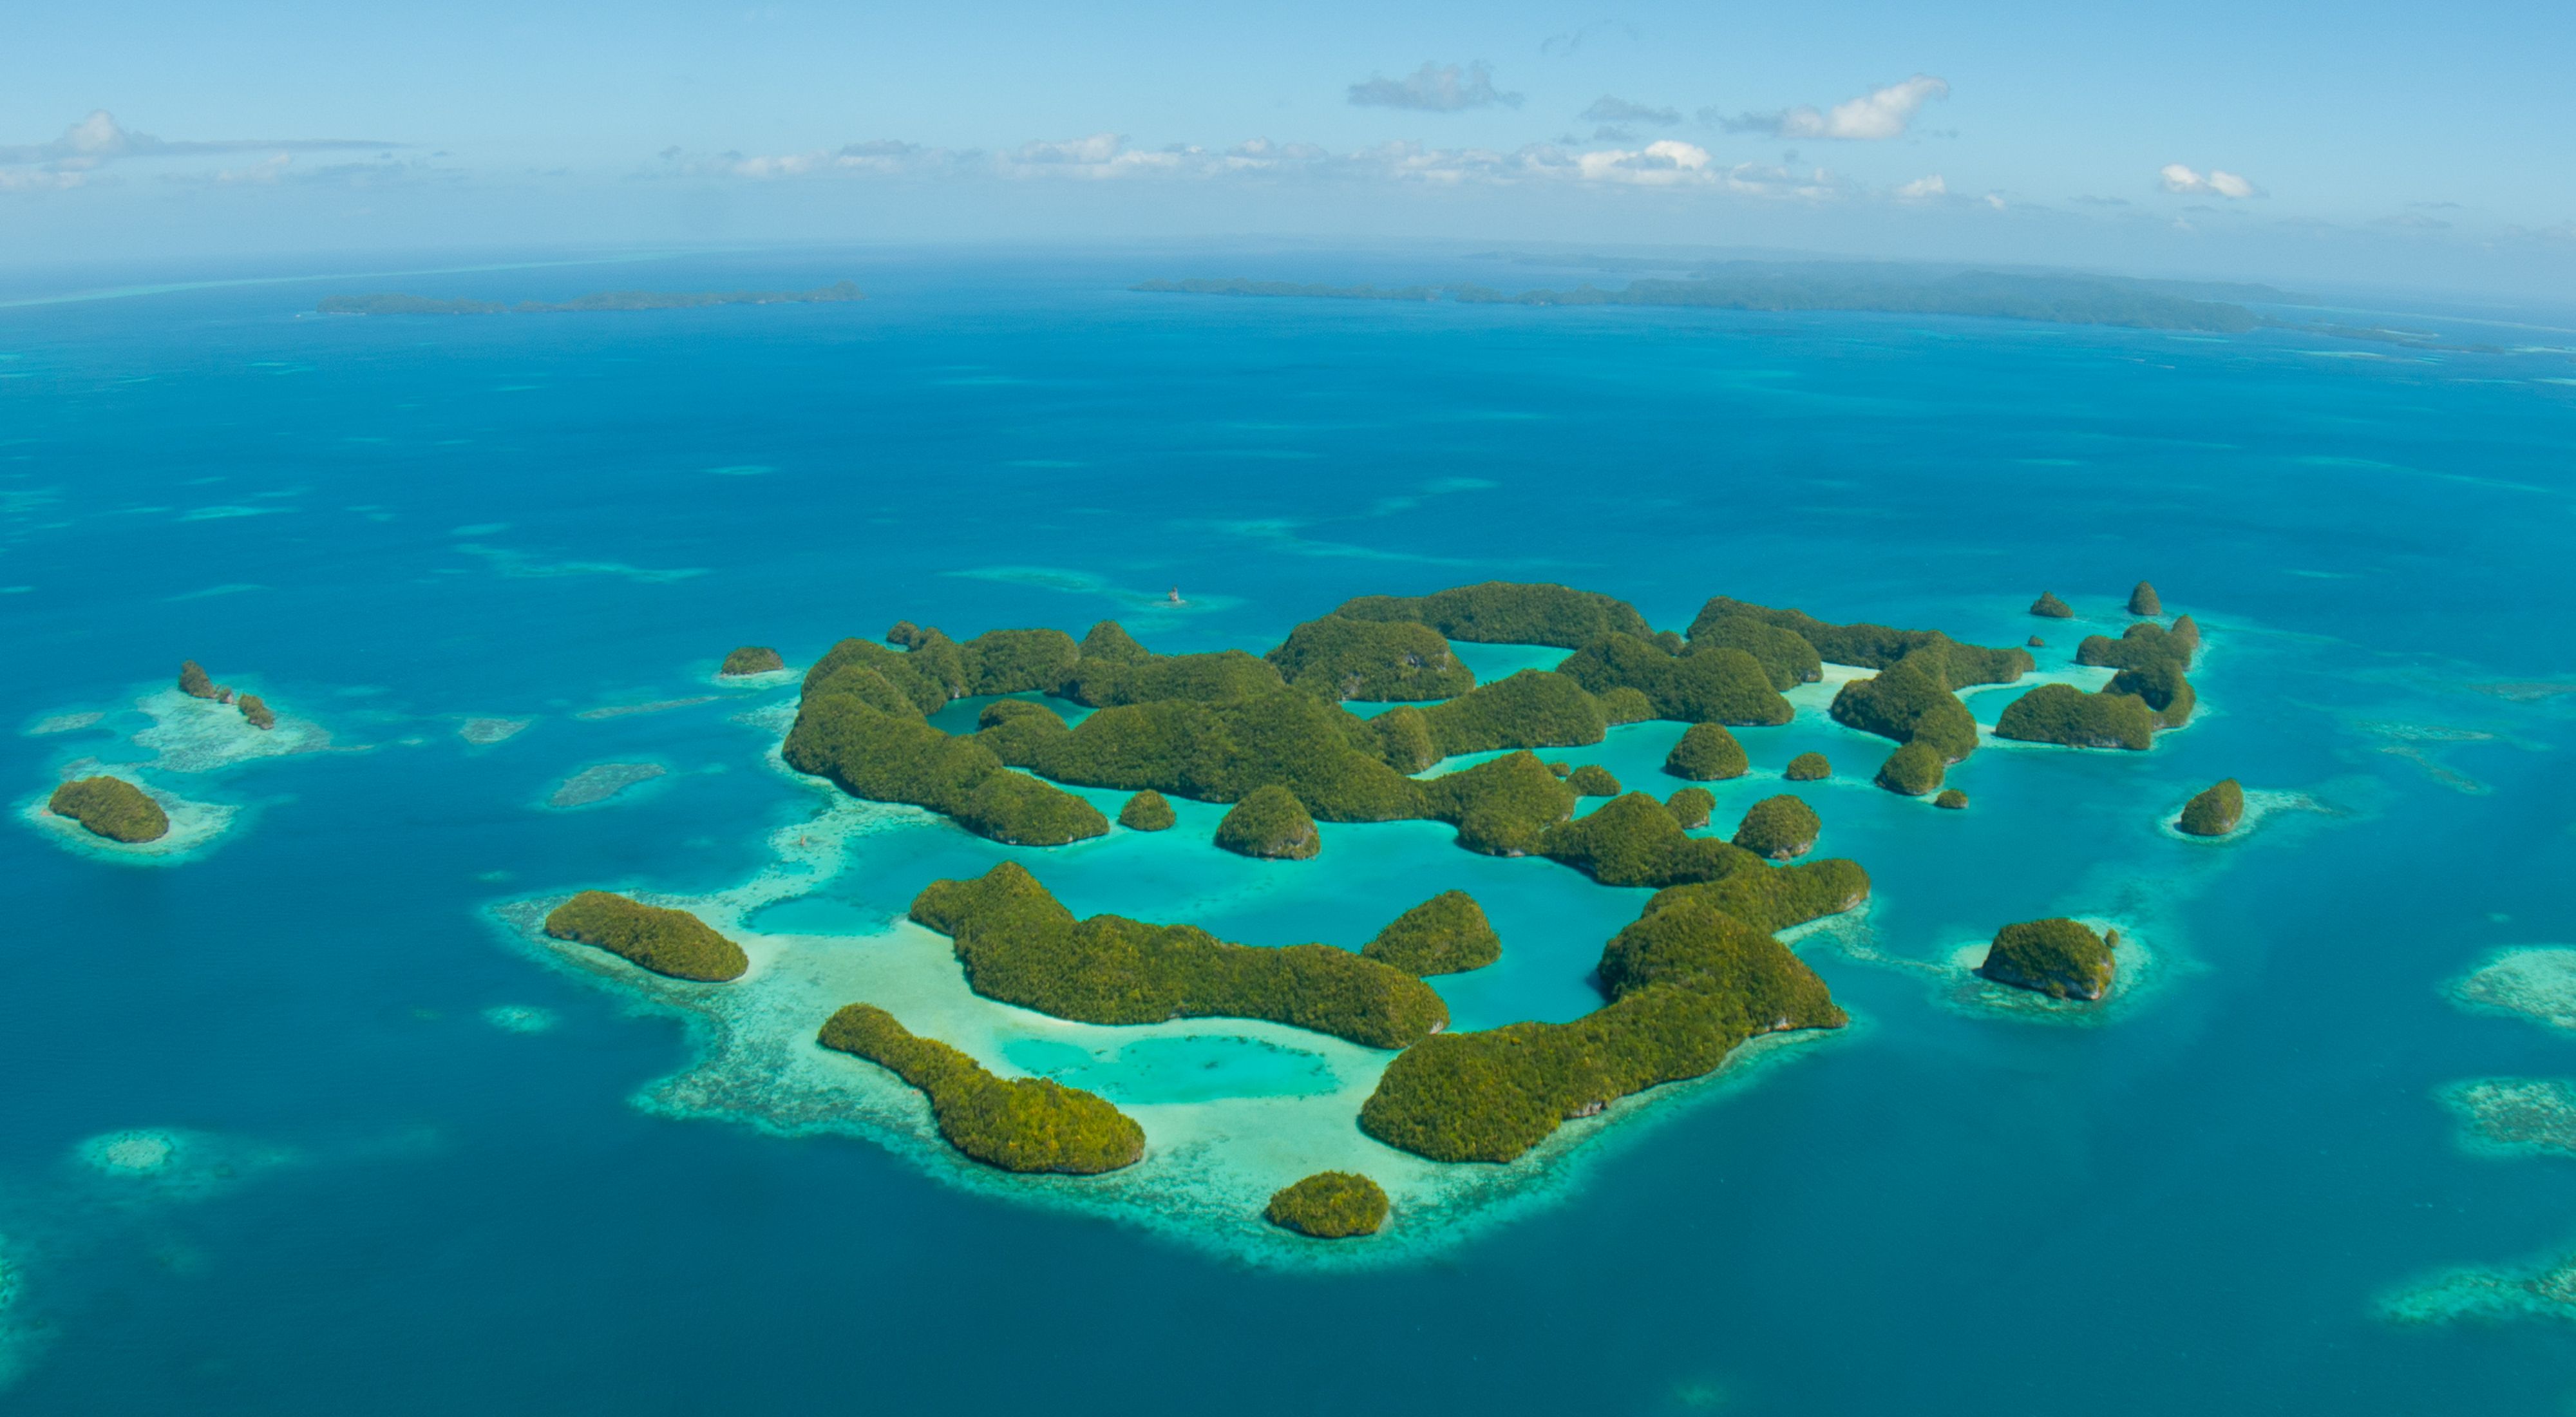 An aerial view of the Republic of Palau.